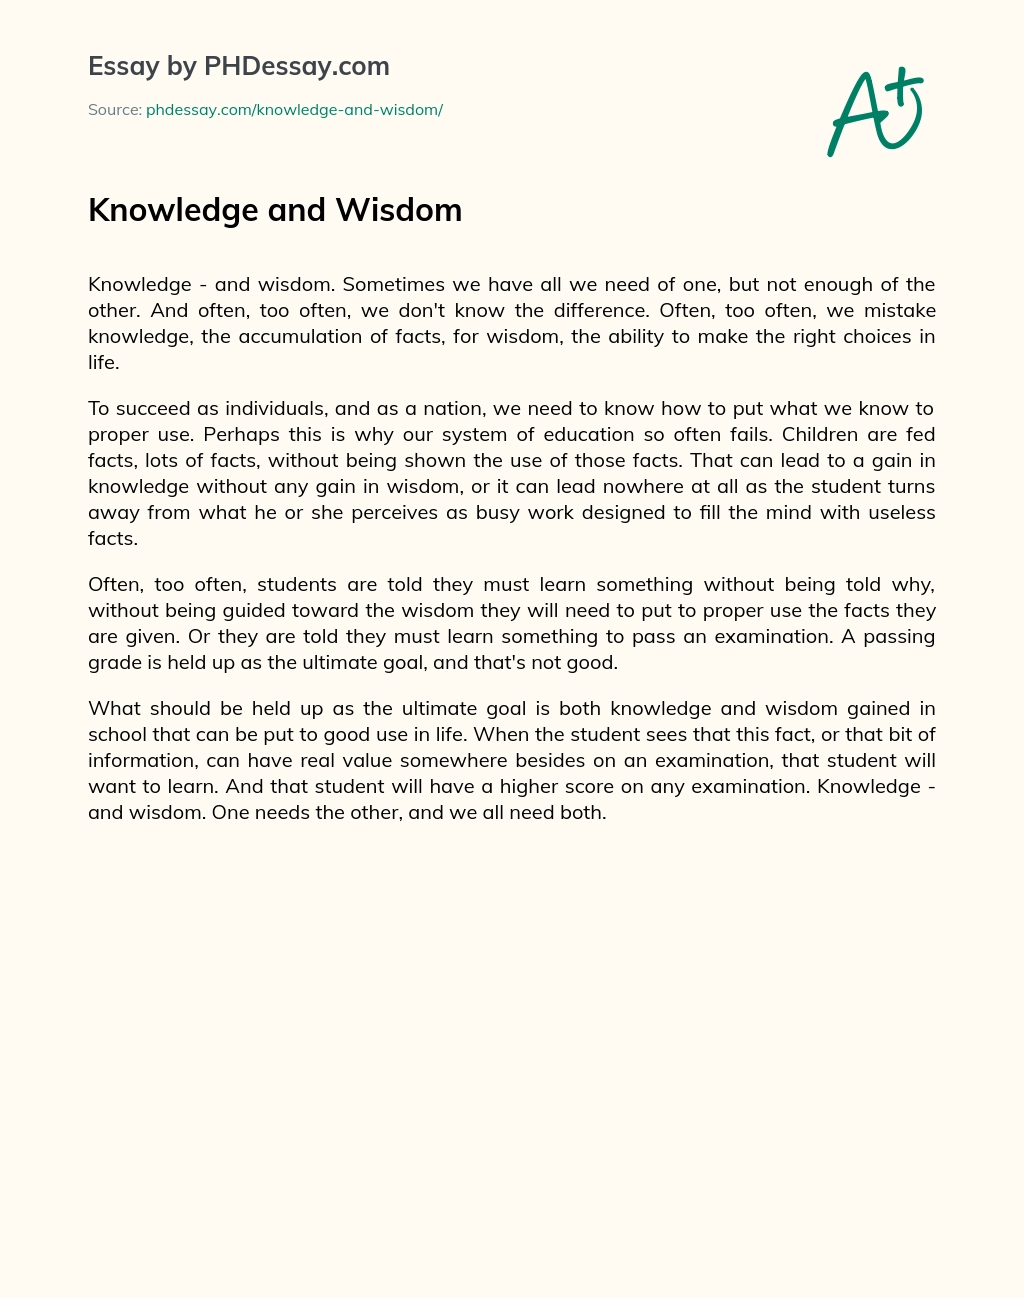 summary of the essay knowledge and wisdom